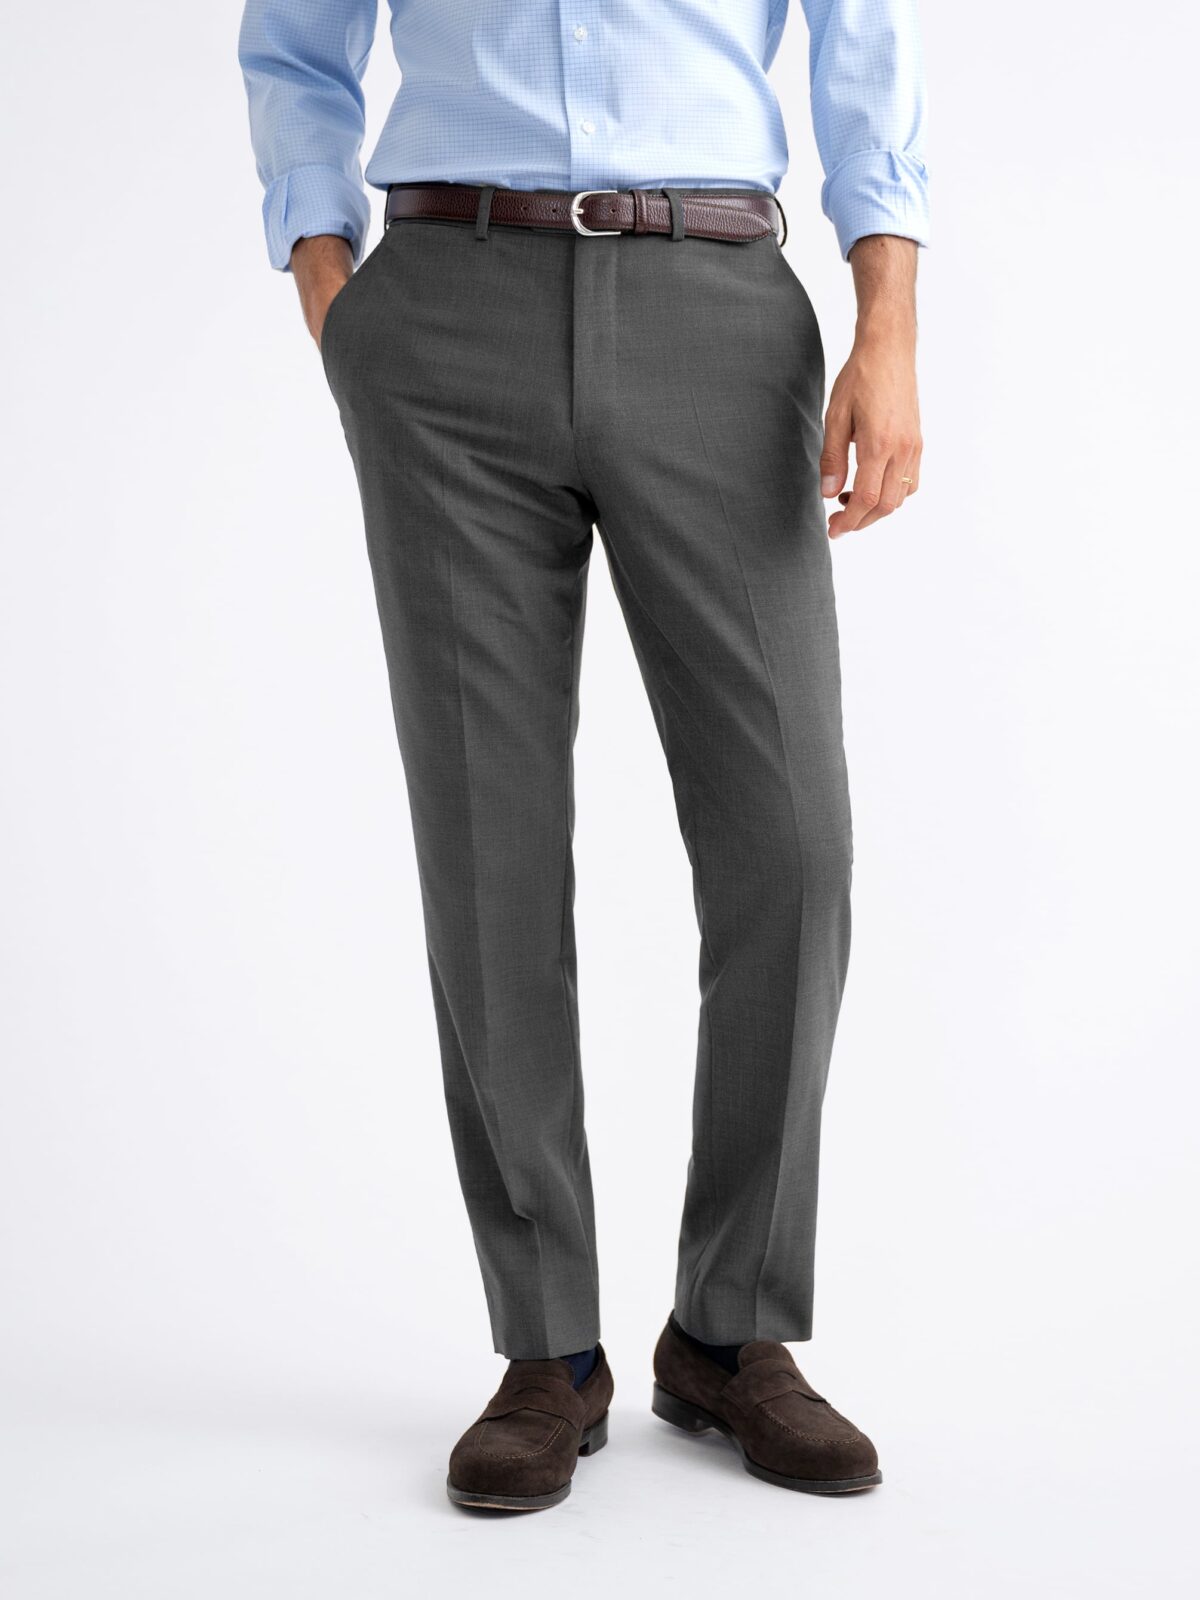 Grey Wool Stretch Dress Pant - Custom Fit Tailored Clothing